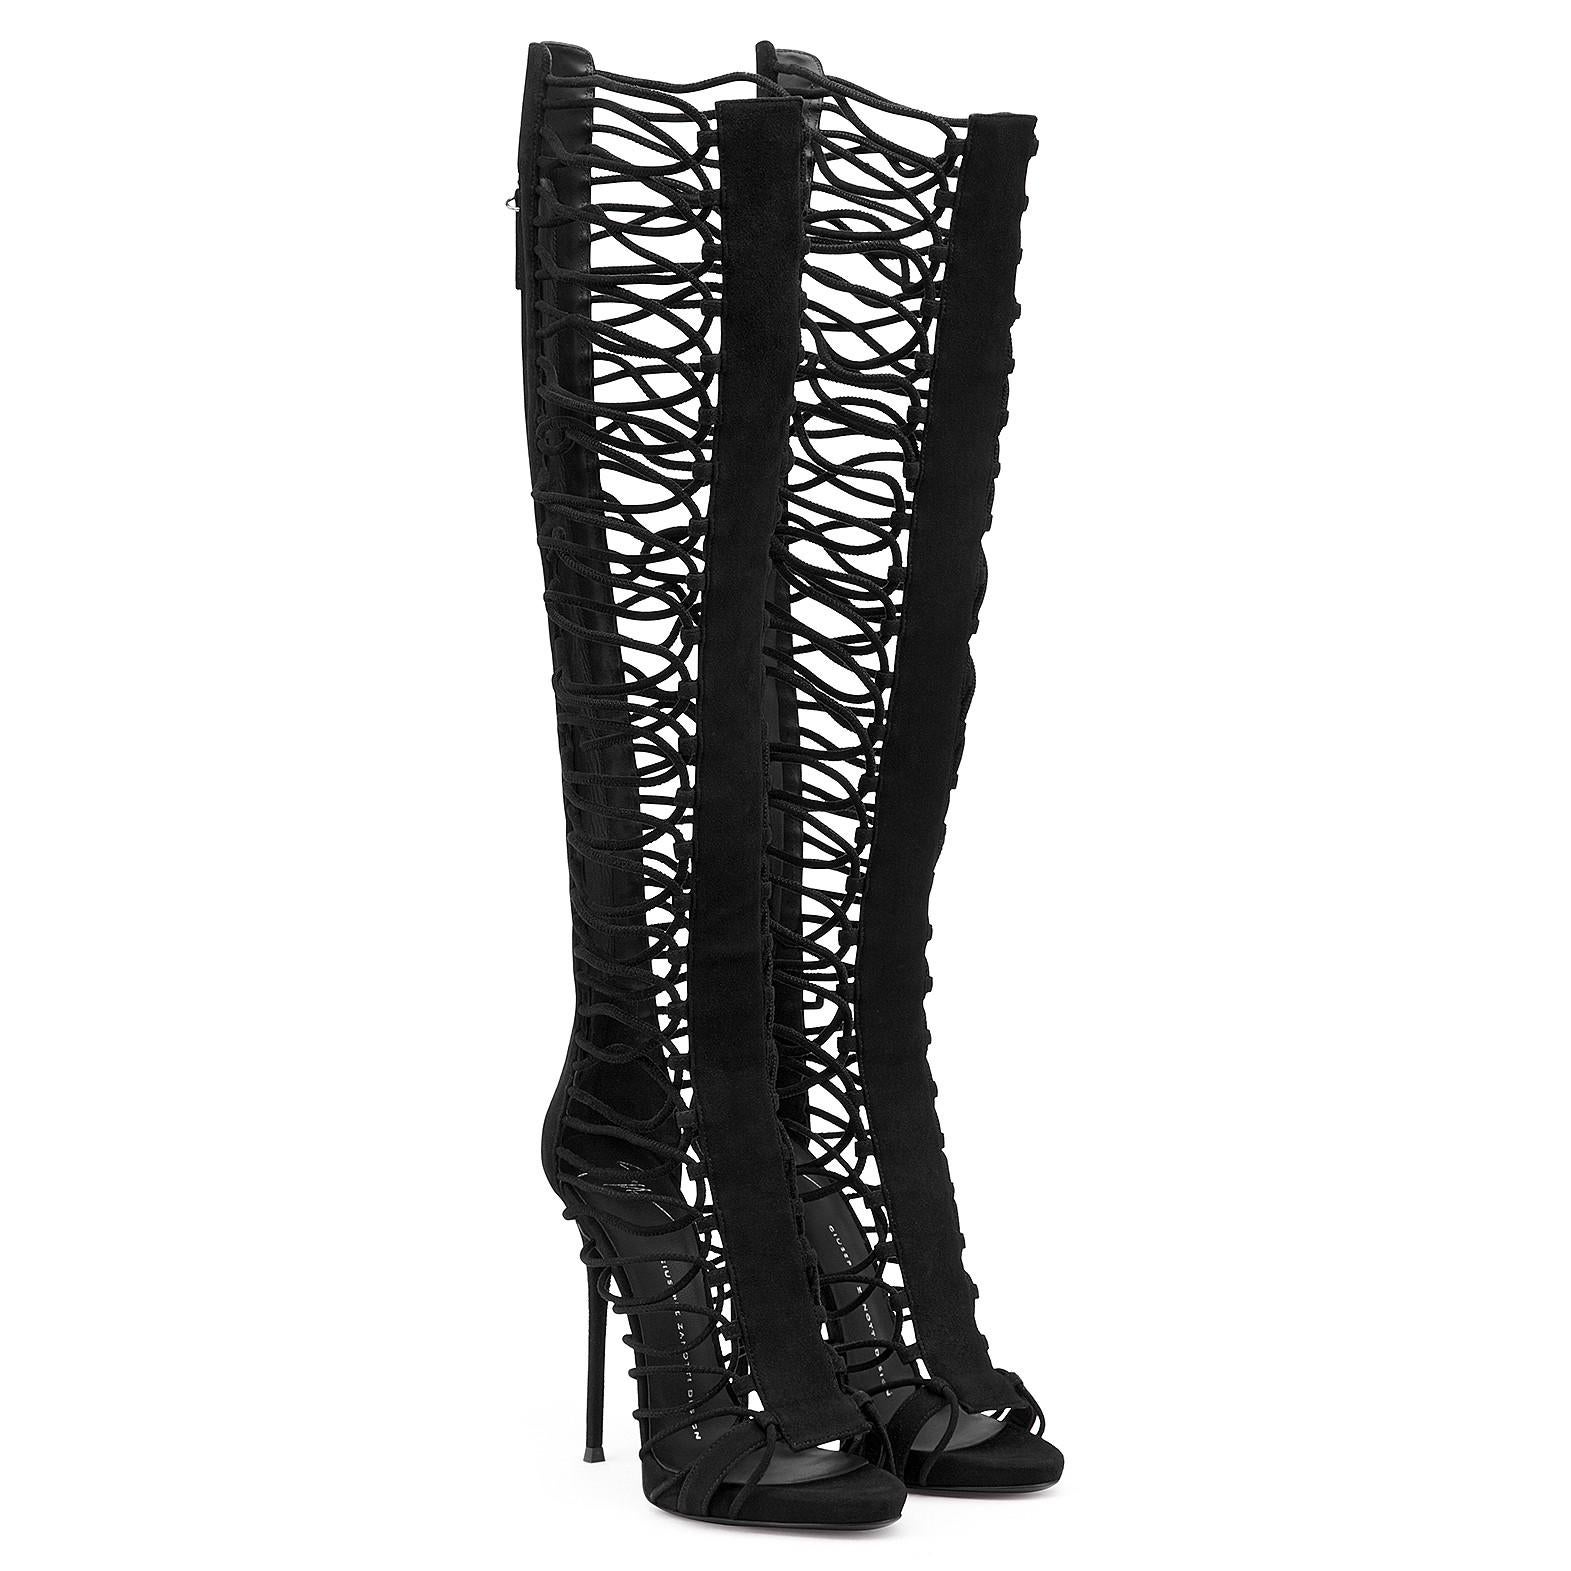 New Guseppe Zanotti *Zoey* Cage Sandals Boots
2018 Collection
Designer size 37 - US 7
4.7 inches heel with 0.5 inches internal platform
Black suede upper
Corded sides
Zip fastening along back
Leather sole with logo
Made in Italy
New with box.
Retail